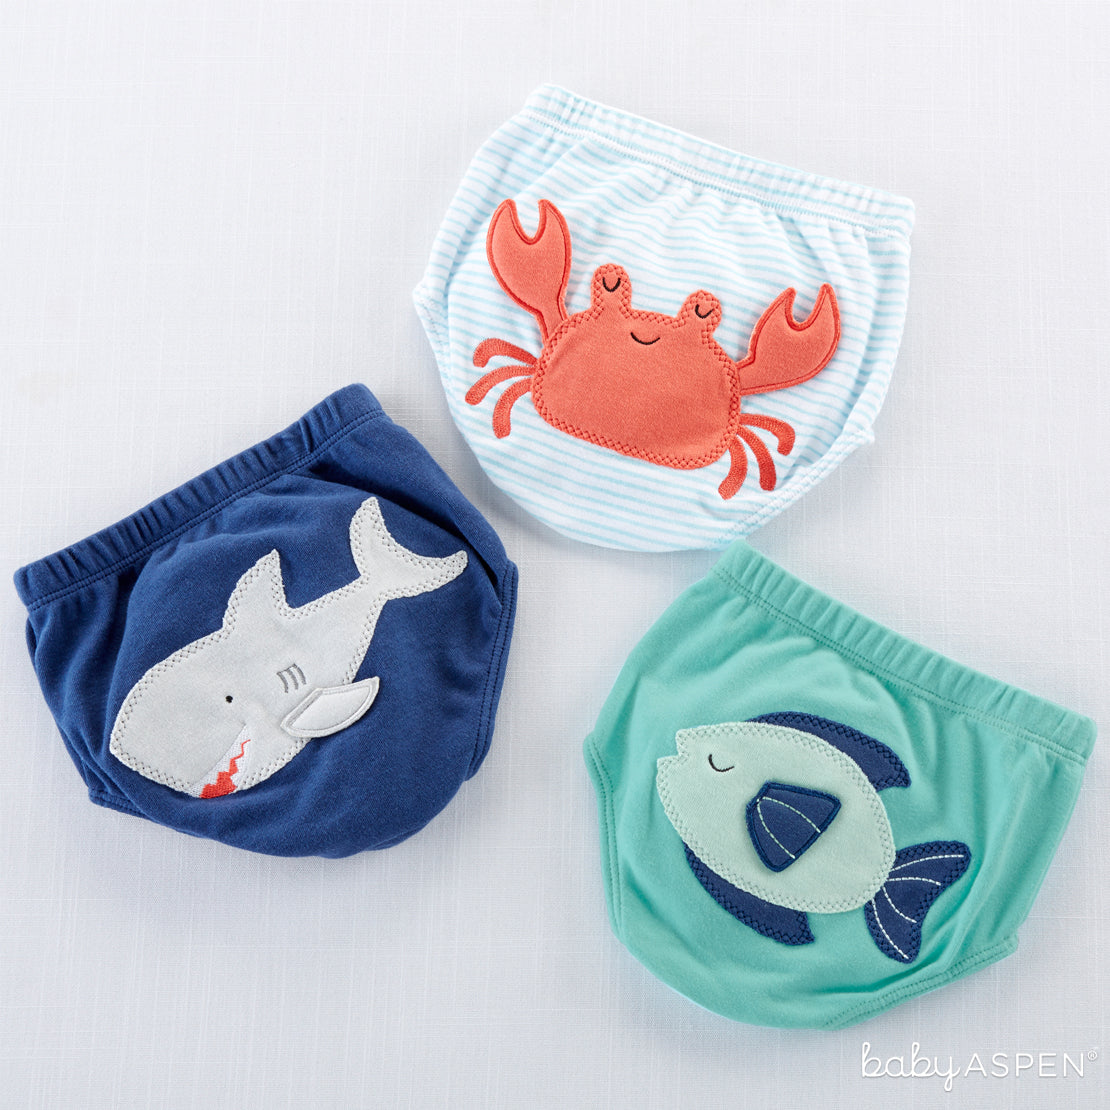 Assortment of Under The Sea 3-piece Diaper Covers - Boy | Brilliant Beach Baby Gifts + A Giveaway | Baby Aspen